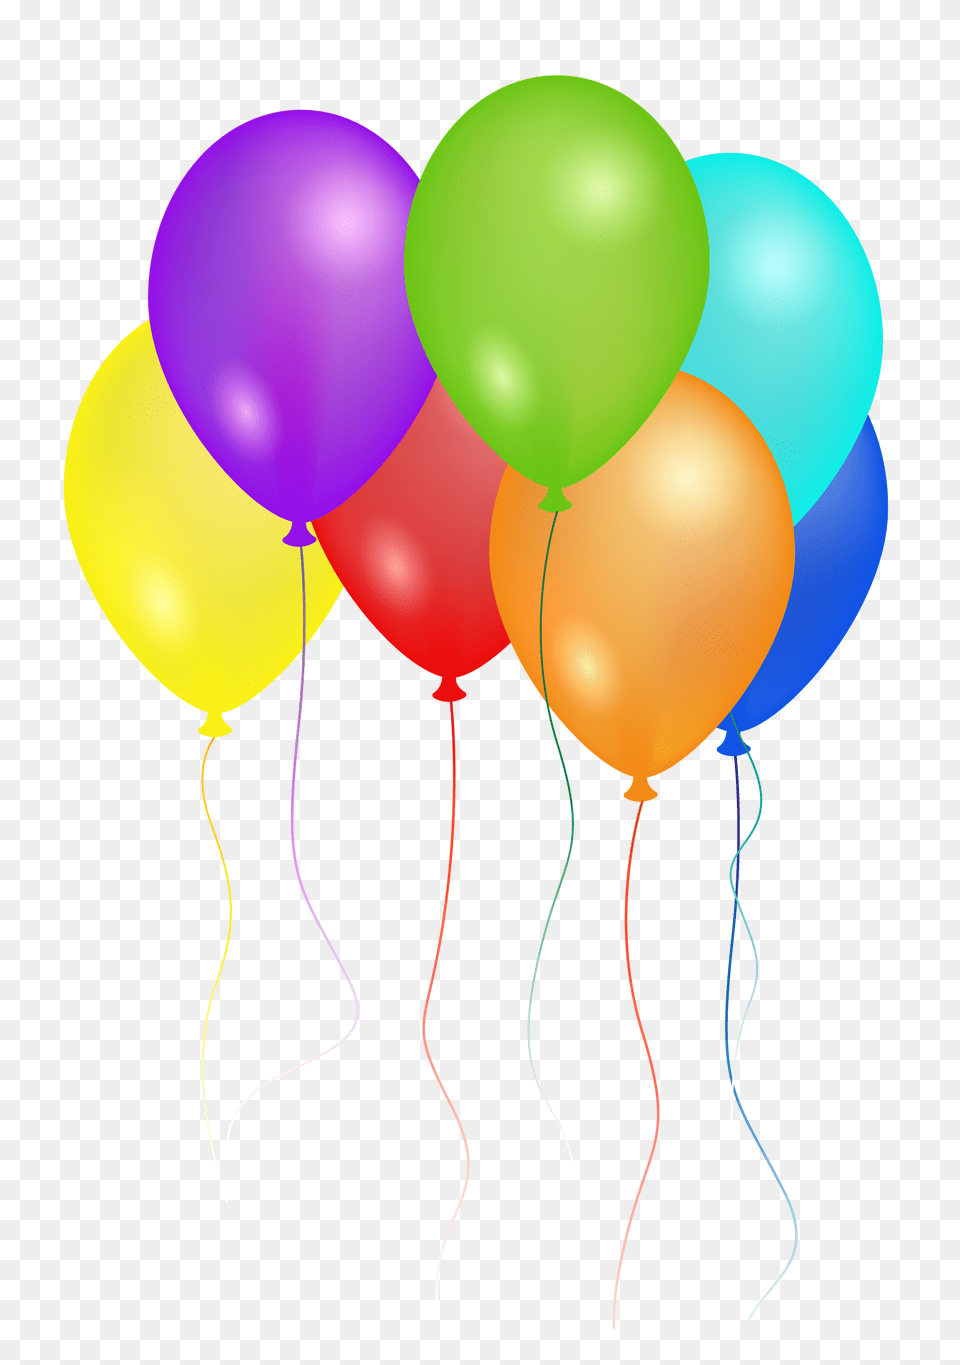 Cliparts Balloons Decorations Clipart Yespressinfo Transparent Background Birthday Balloons, Balloon Png